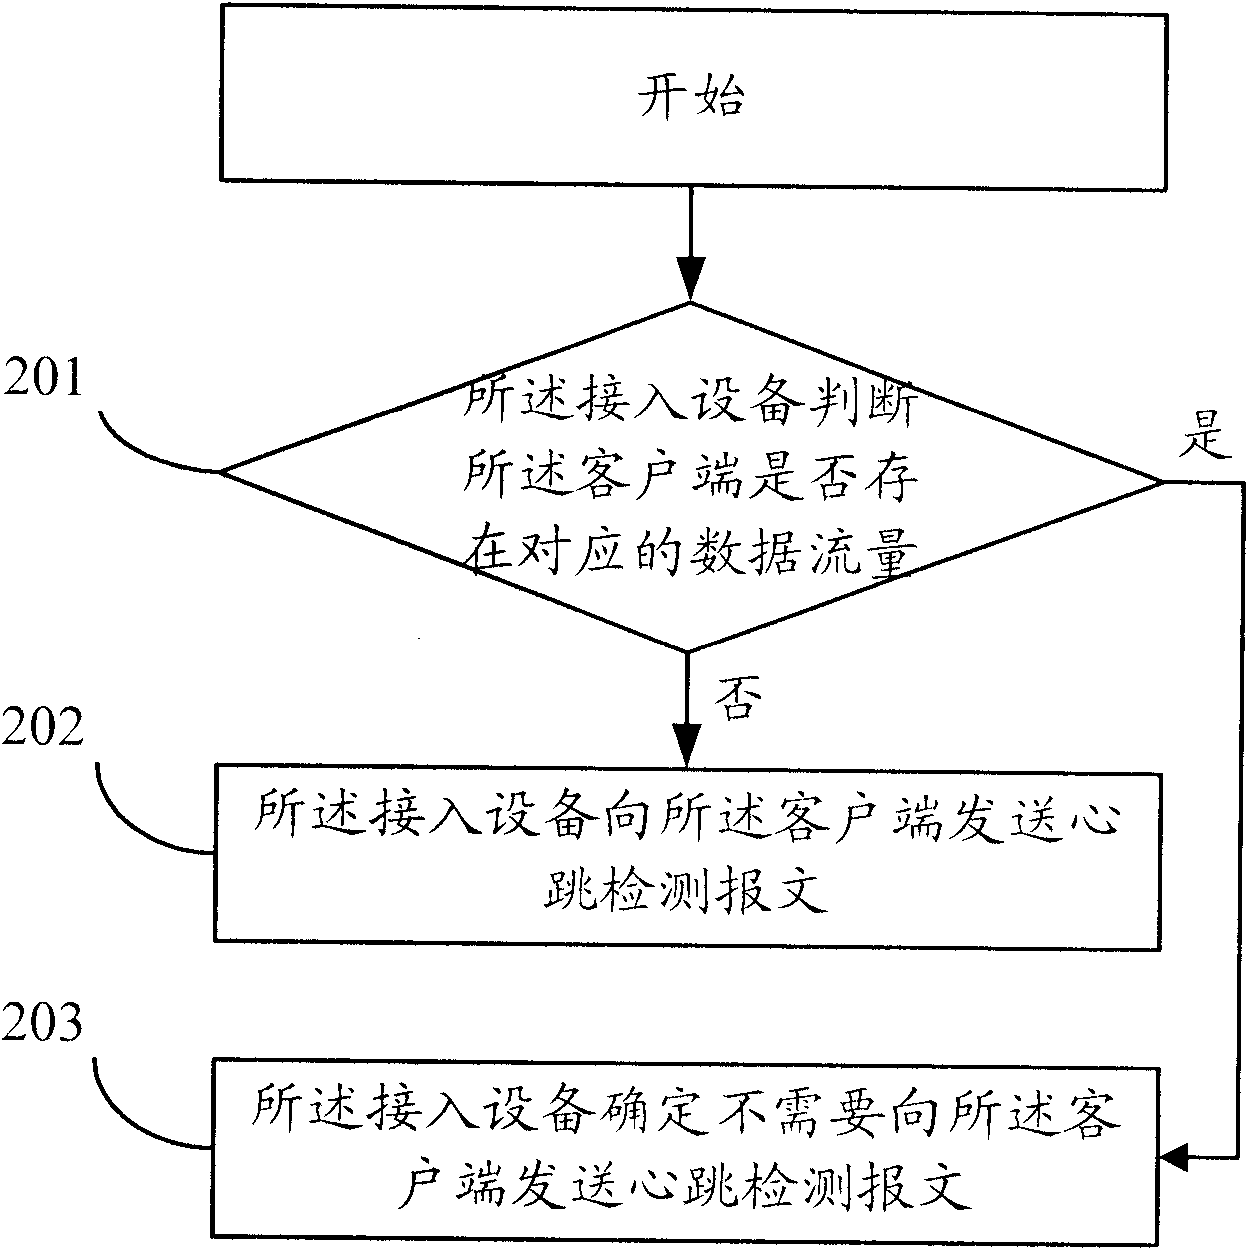 Heartbeat detection message sending method and equipment